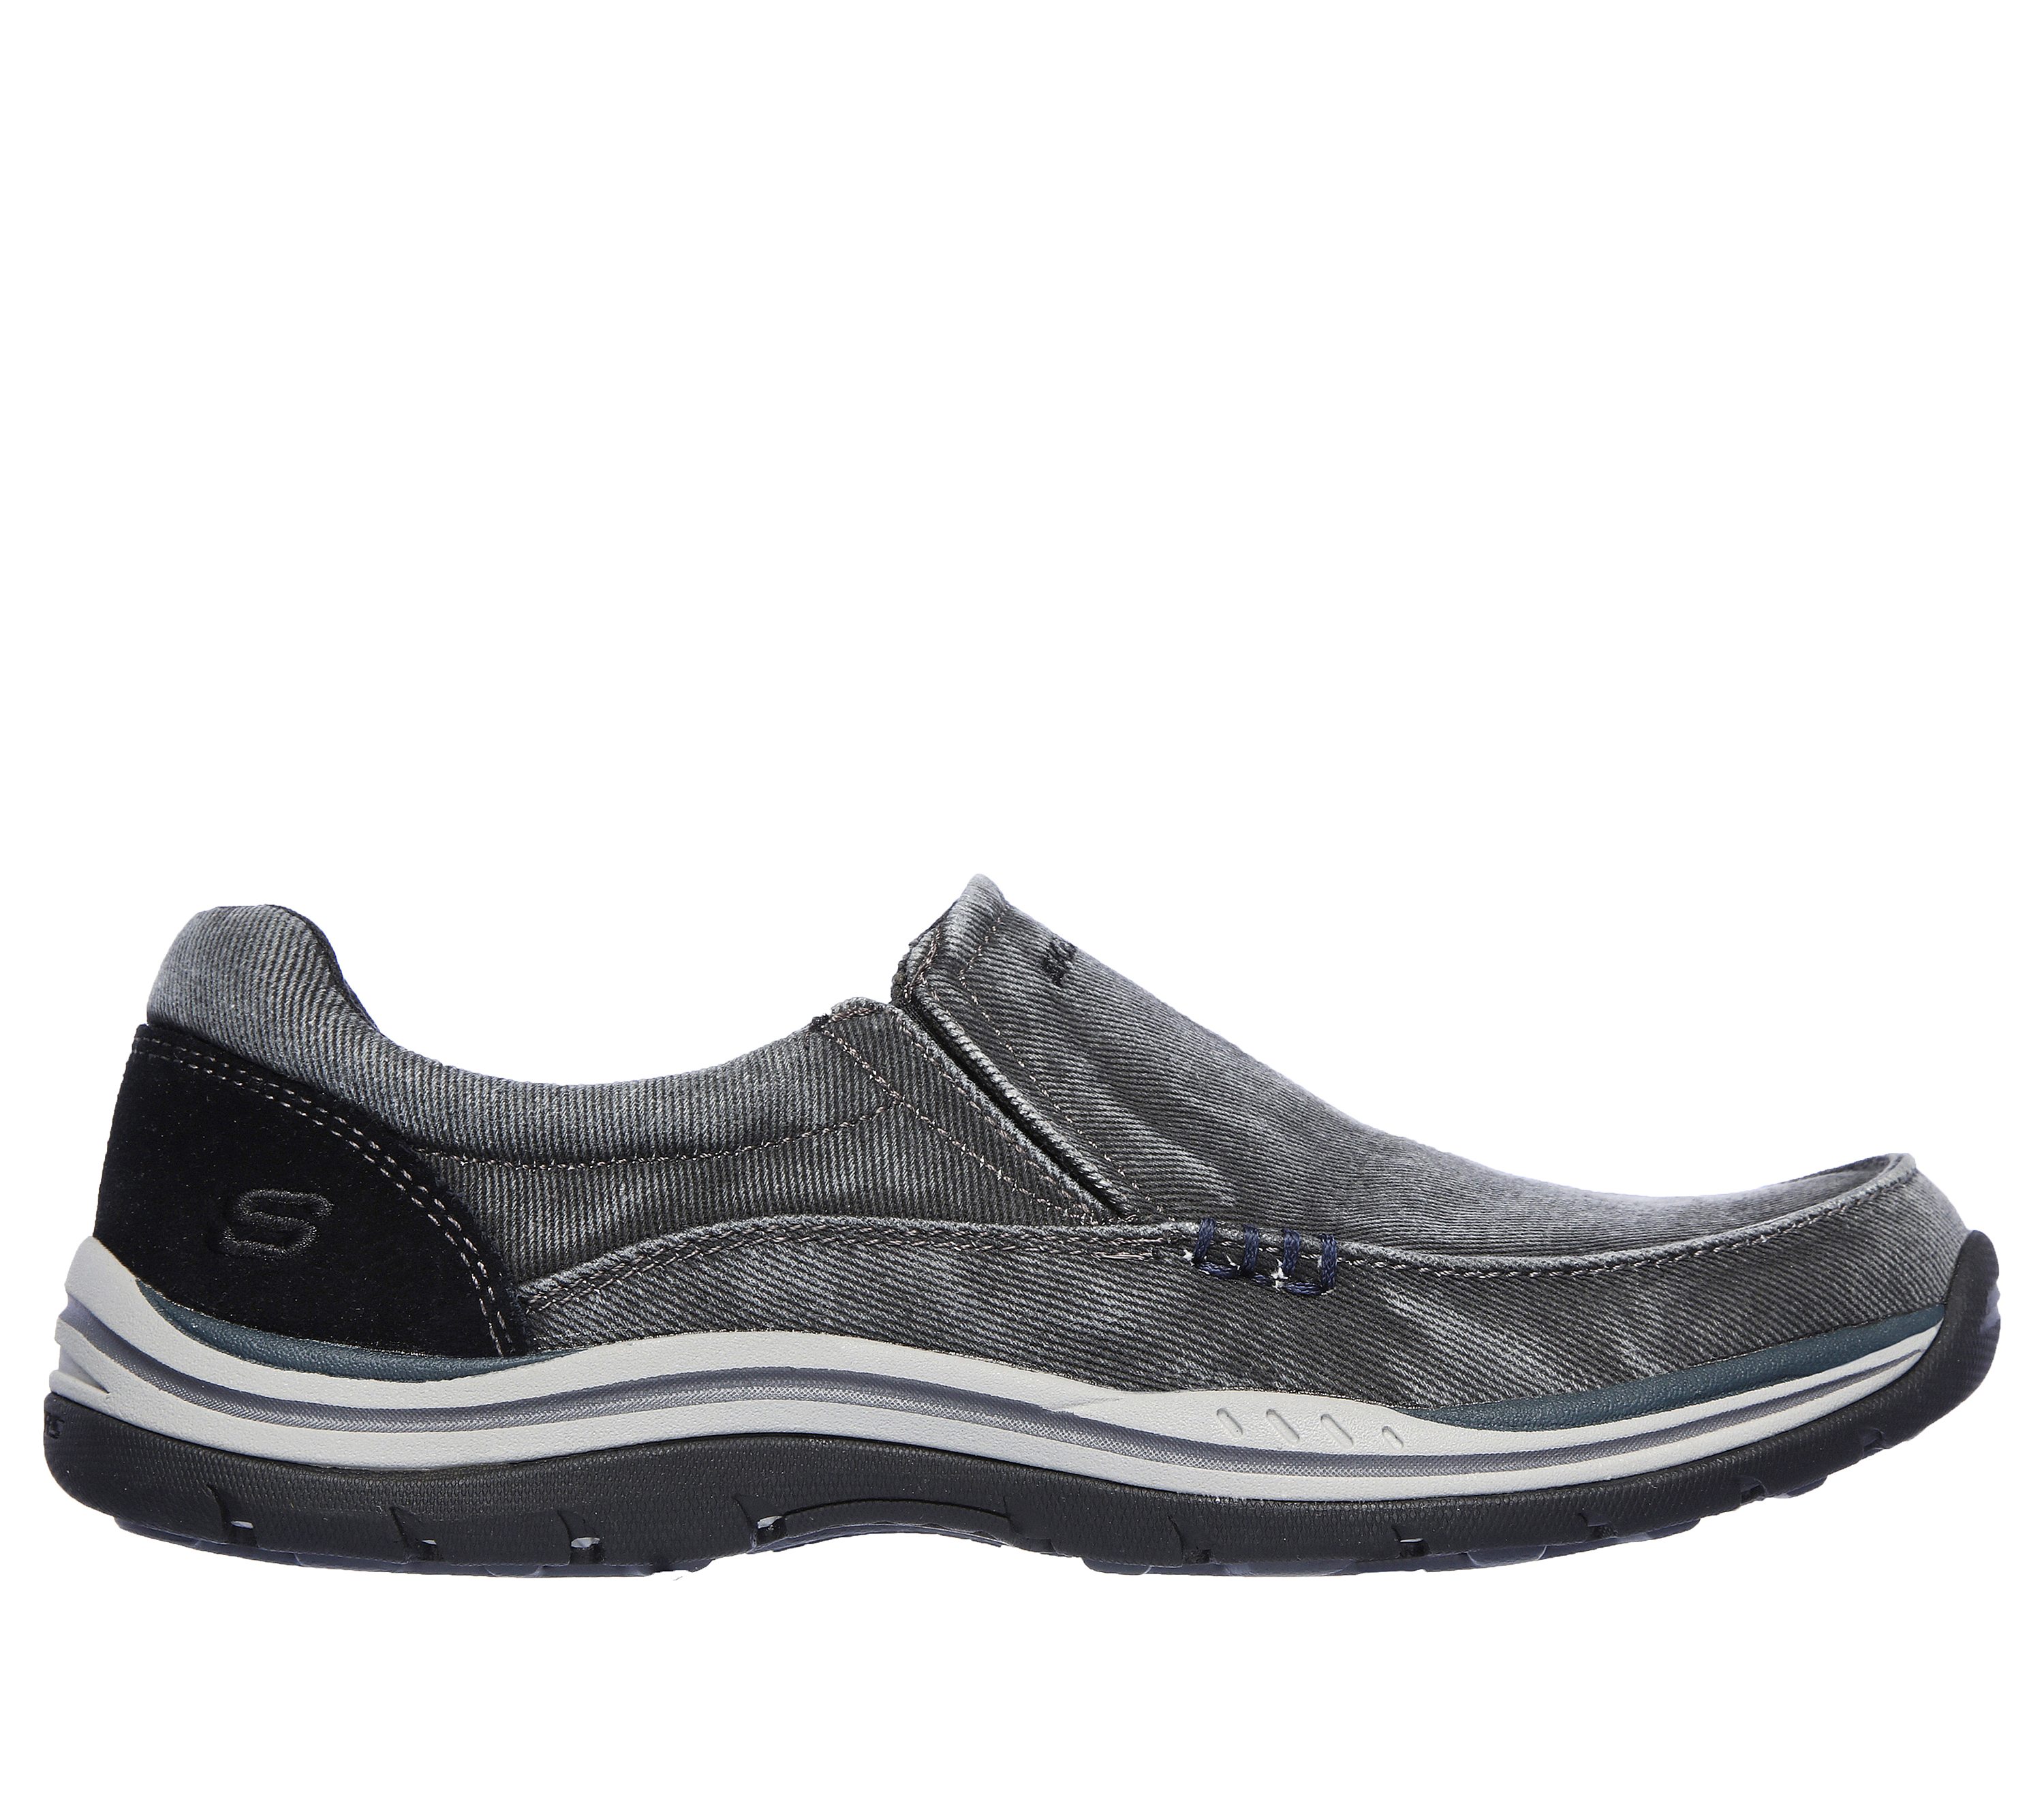 Relaxed Fit: Expected - Avillo | SKECHERS